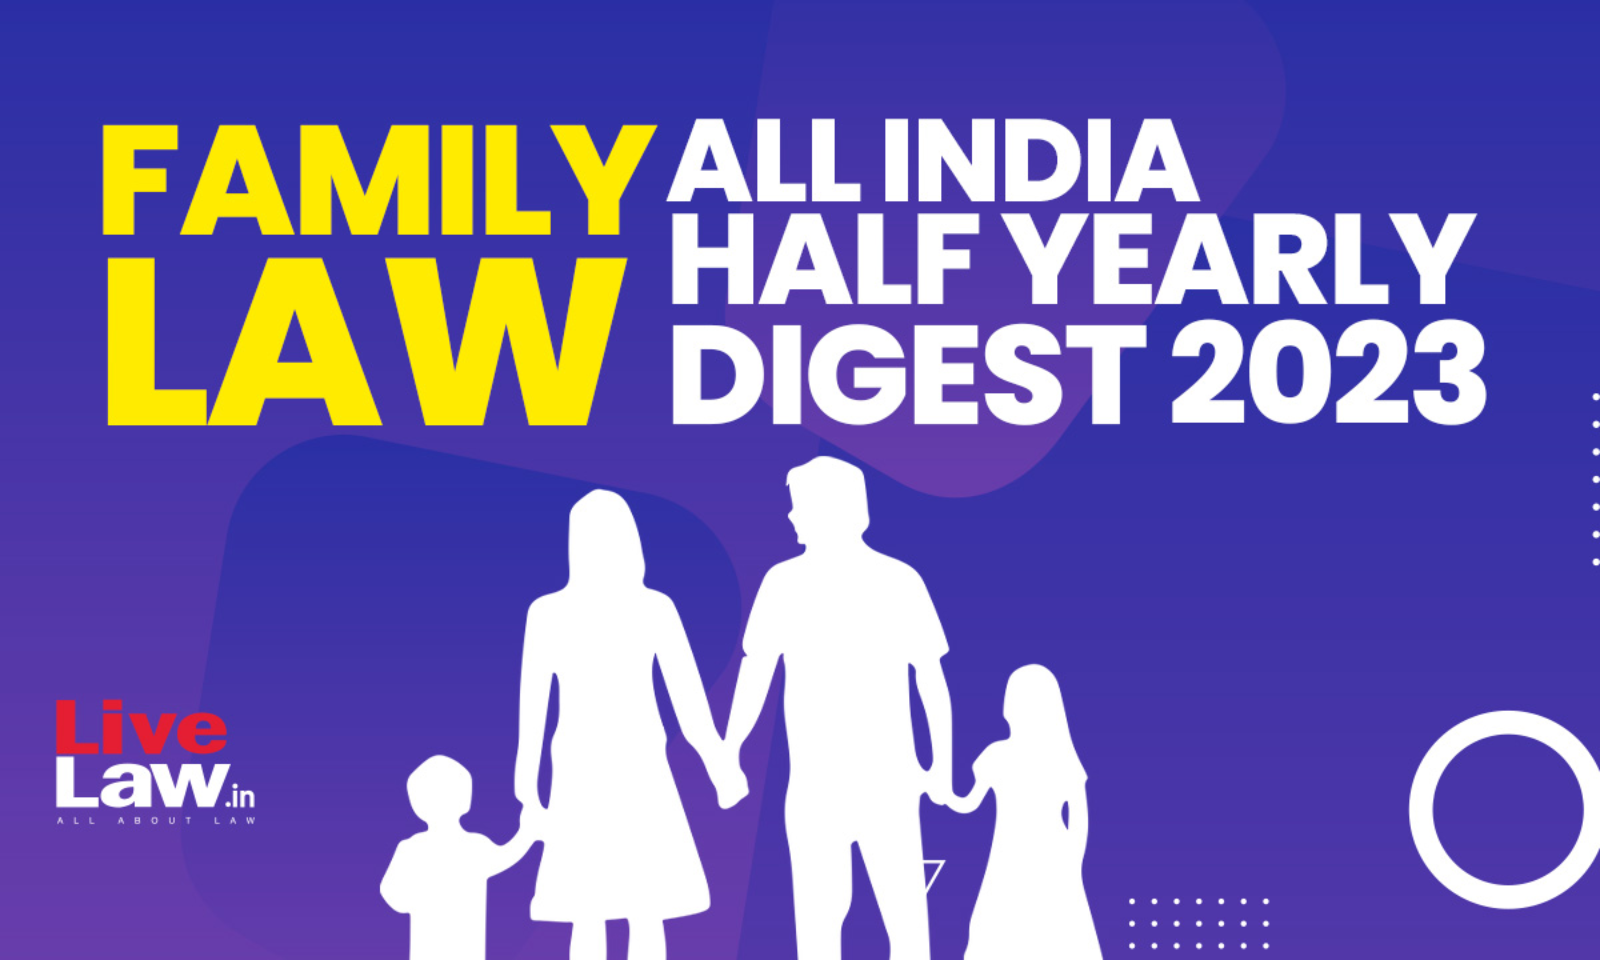 Divya Gupta Sex Video - Family Law: All India Half Yearly Digest 2023